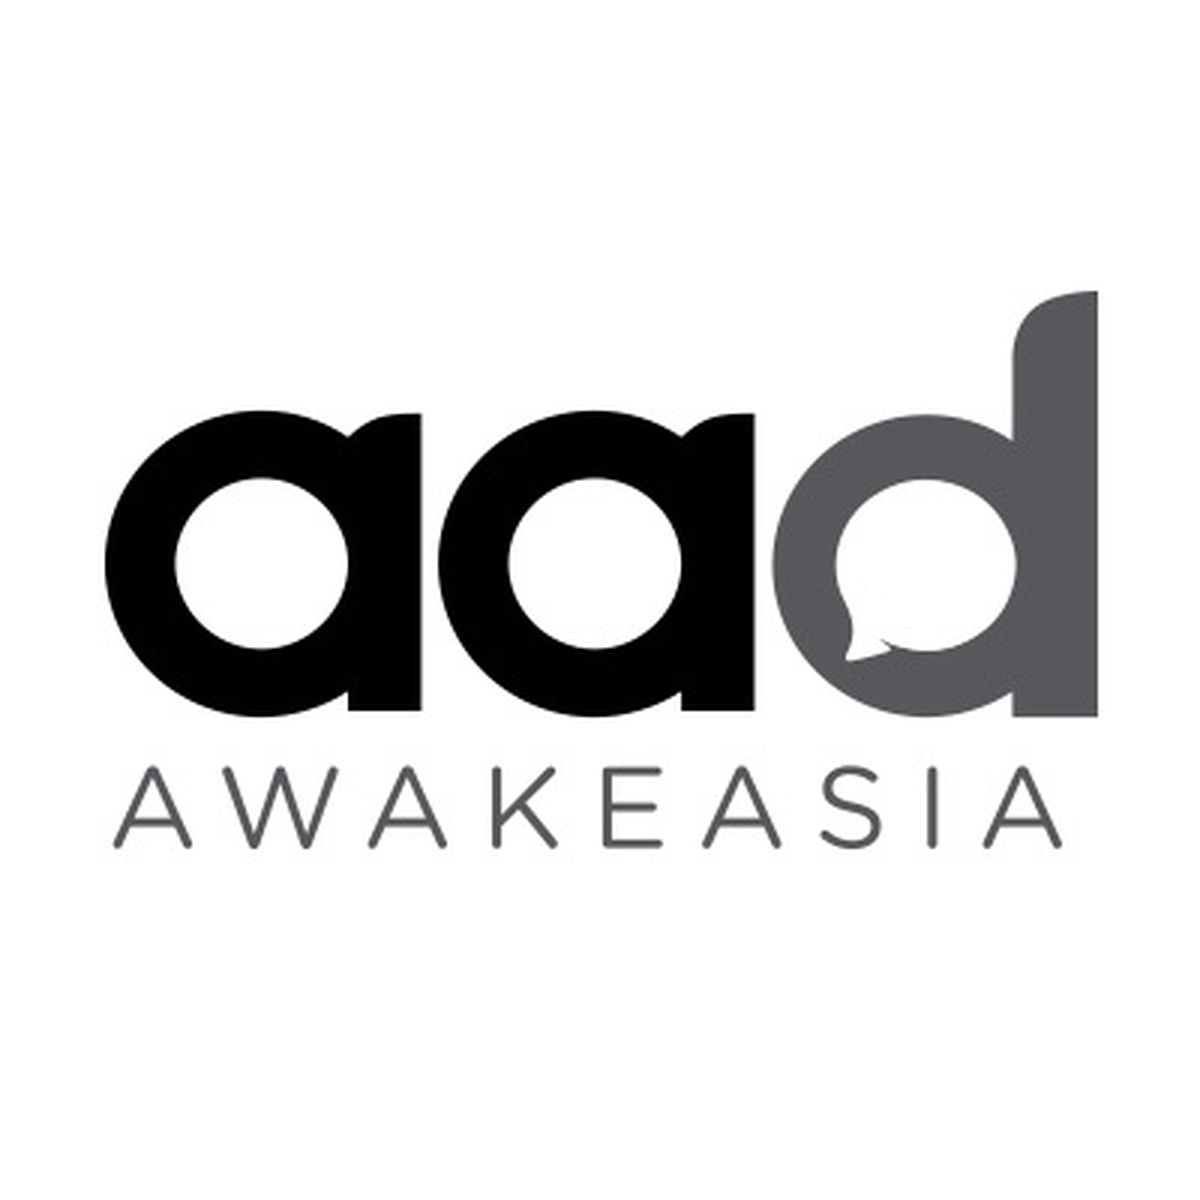 Awake Asia is hiring a Head Of Operations (Supply & Demand ...